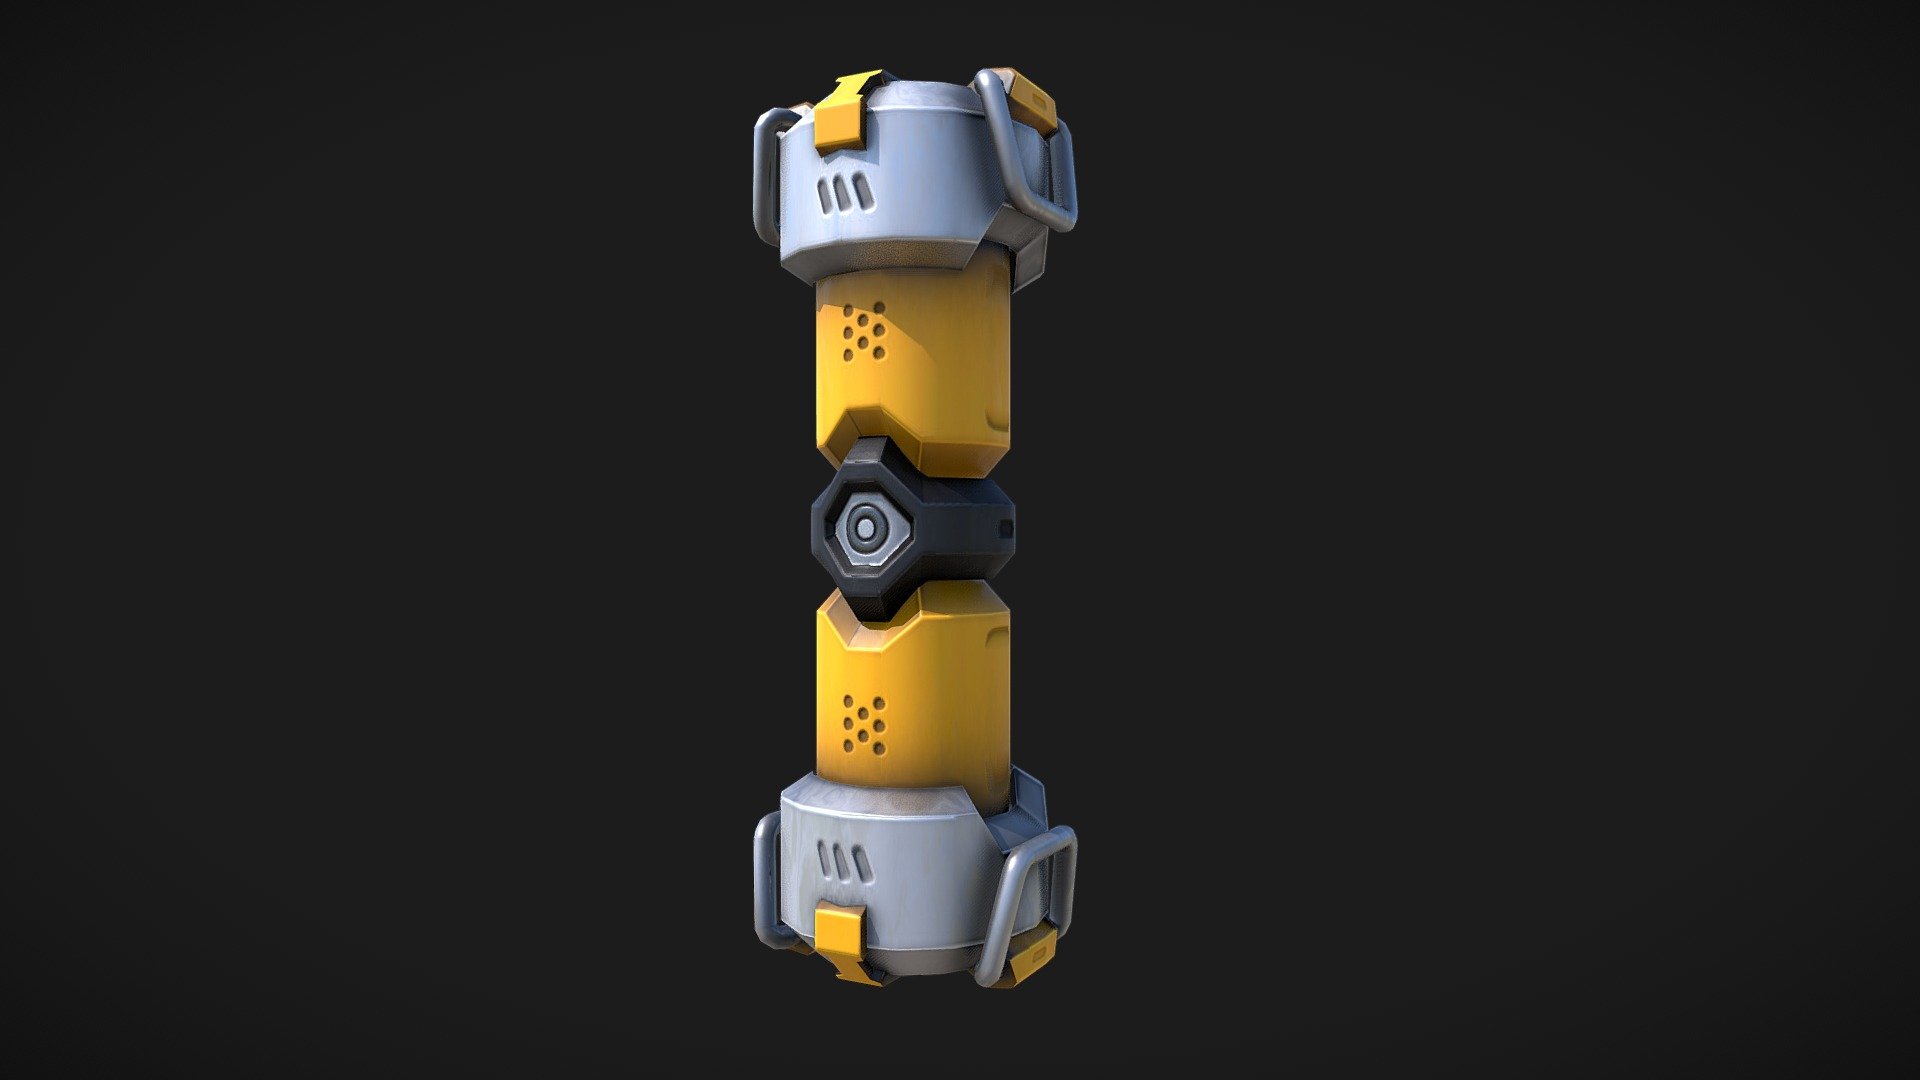 I wanted to see how powerful blender was for texture painting, so I made this sort of overwatch style energy bottle 3d model